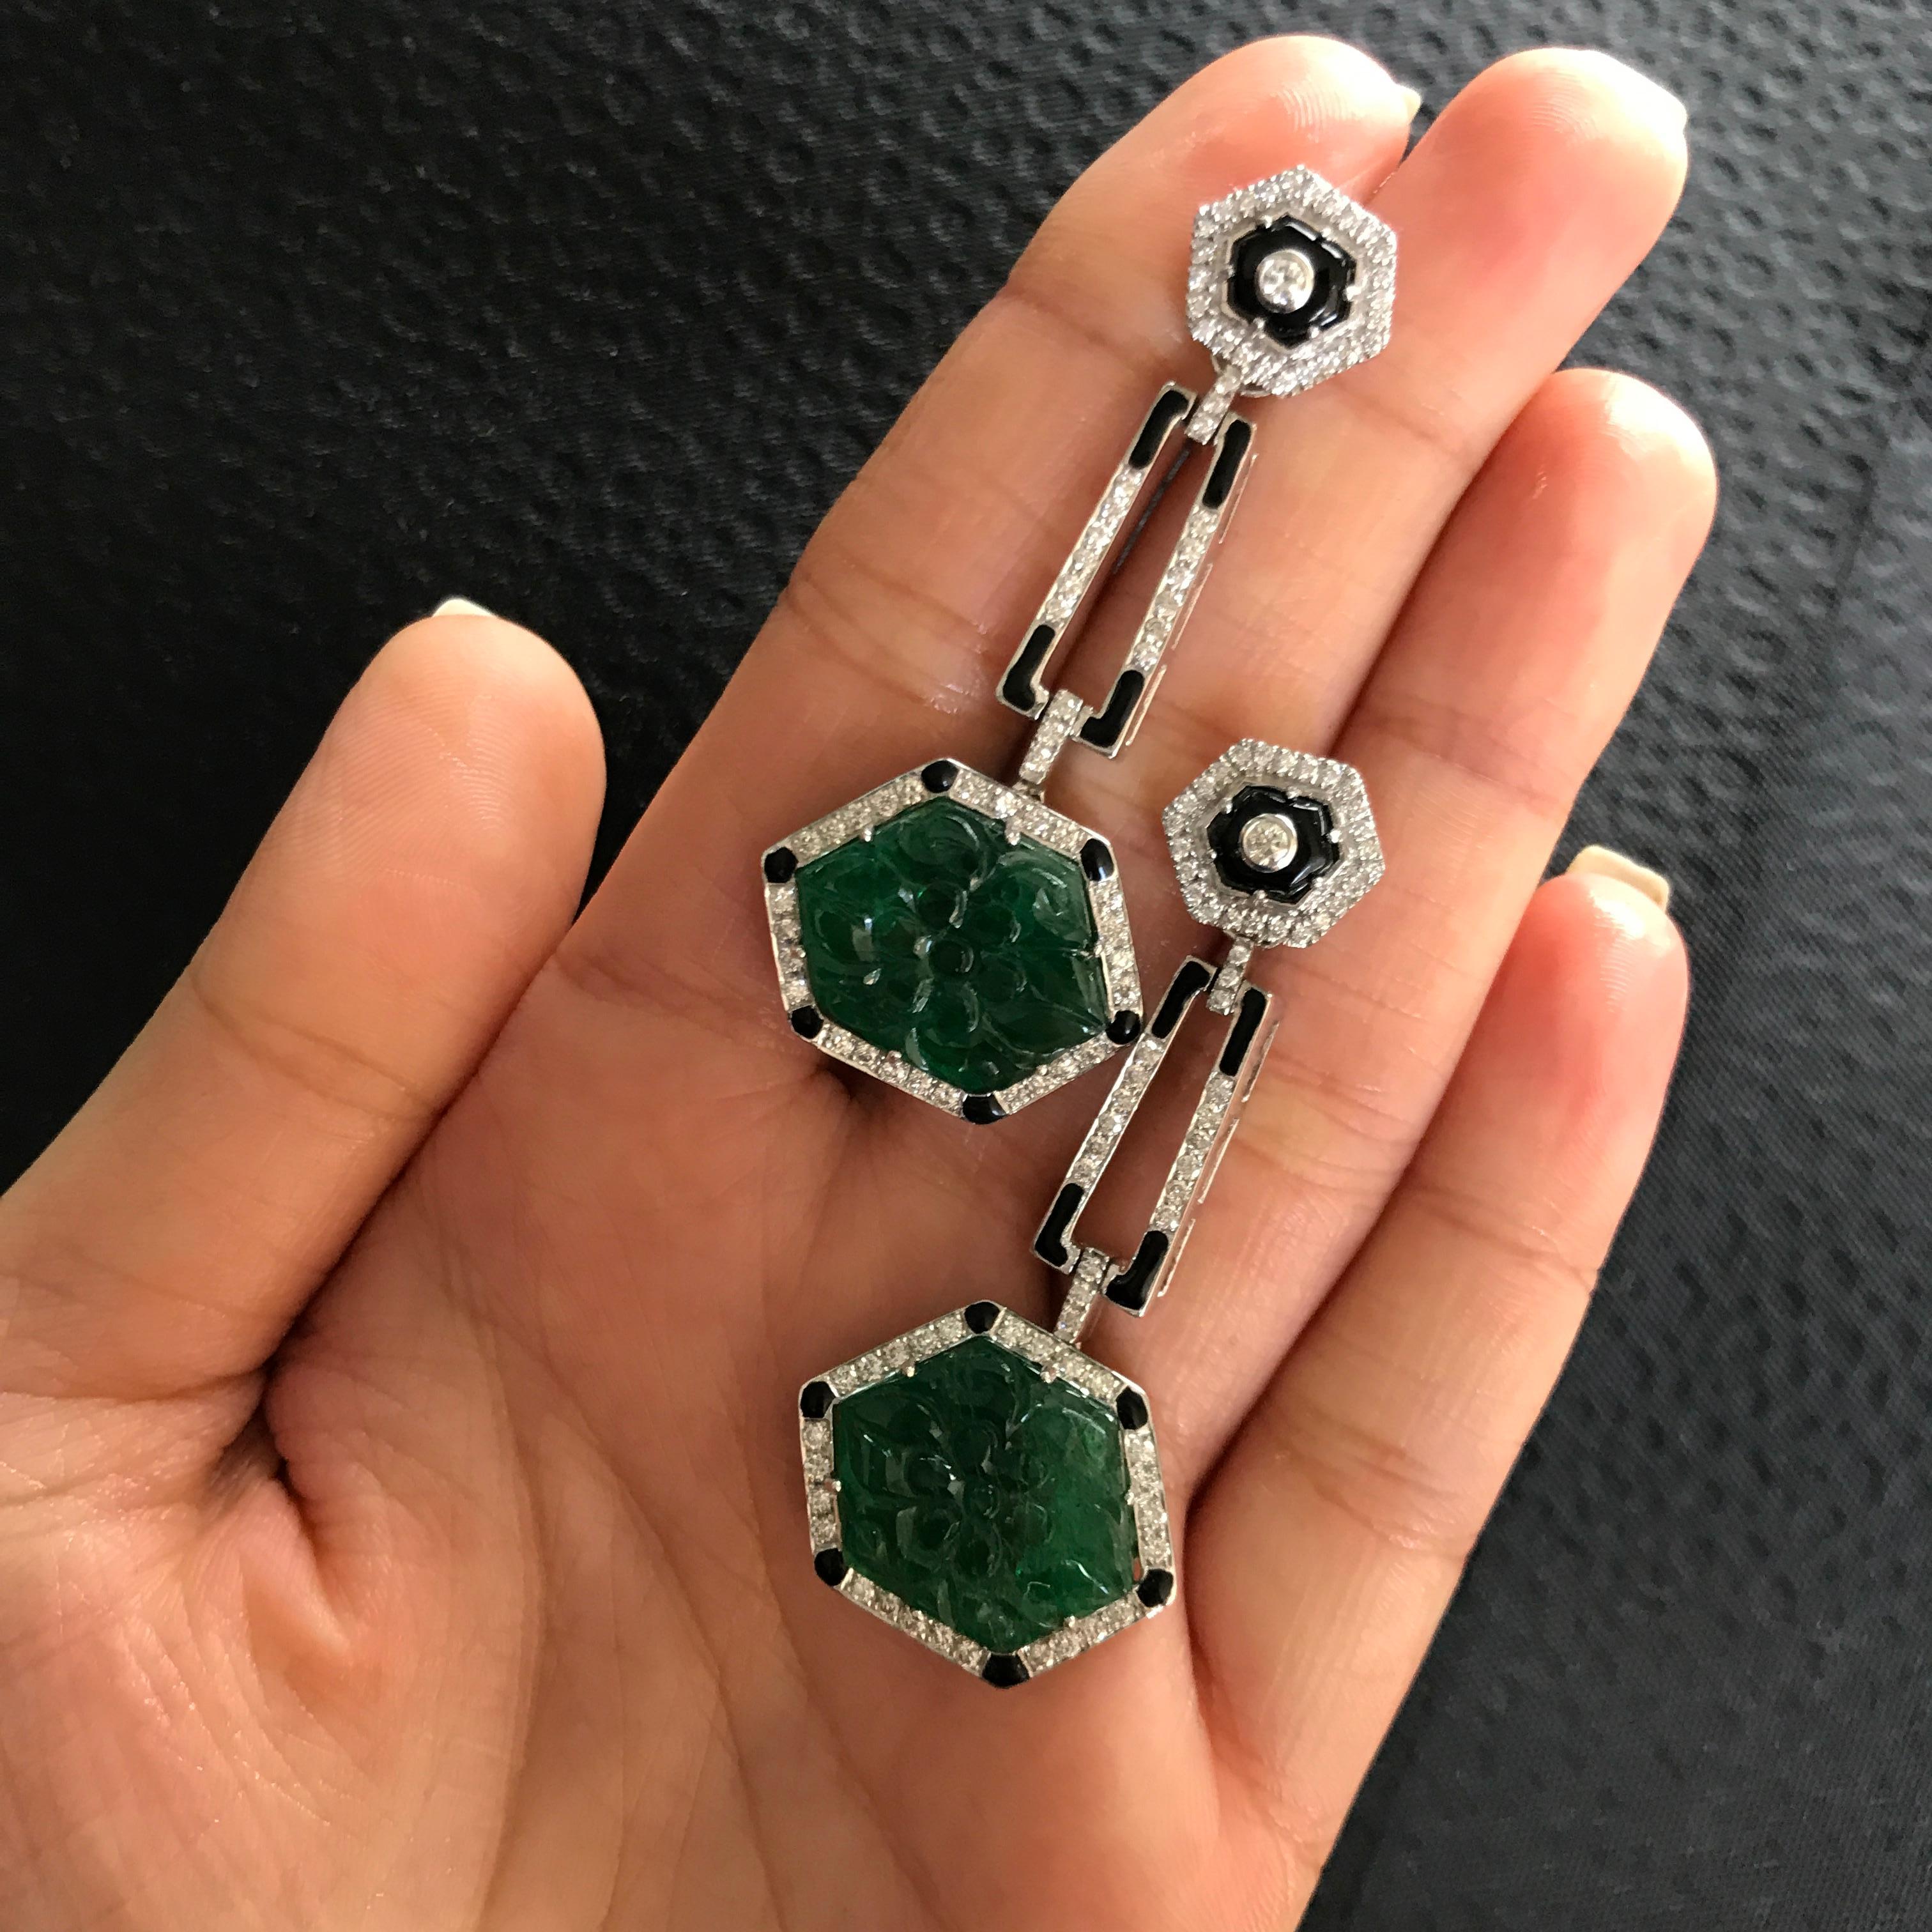 A pair of very unique, art-deco looking Zambian Emerald dangling earrings with push-pull backing,  with White Diamonds and enamel work all set in 18K white gold.   

Stone Details:  
Stone: Zambian Emerald  
Carat Weight: 2pcs / 24.96 Carats